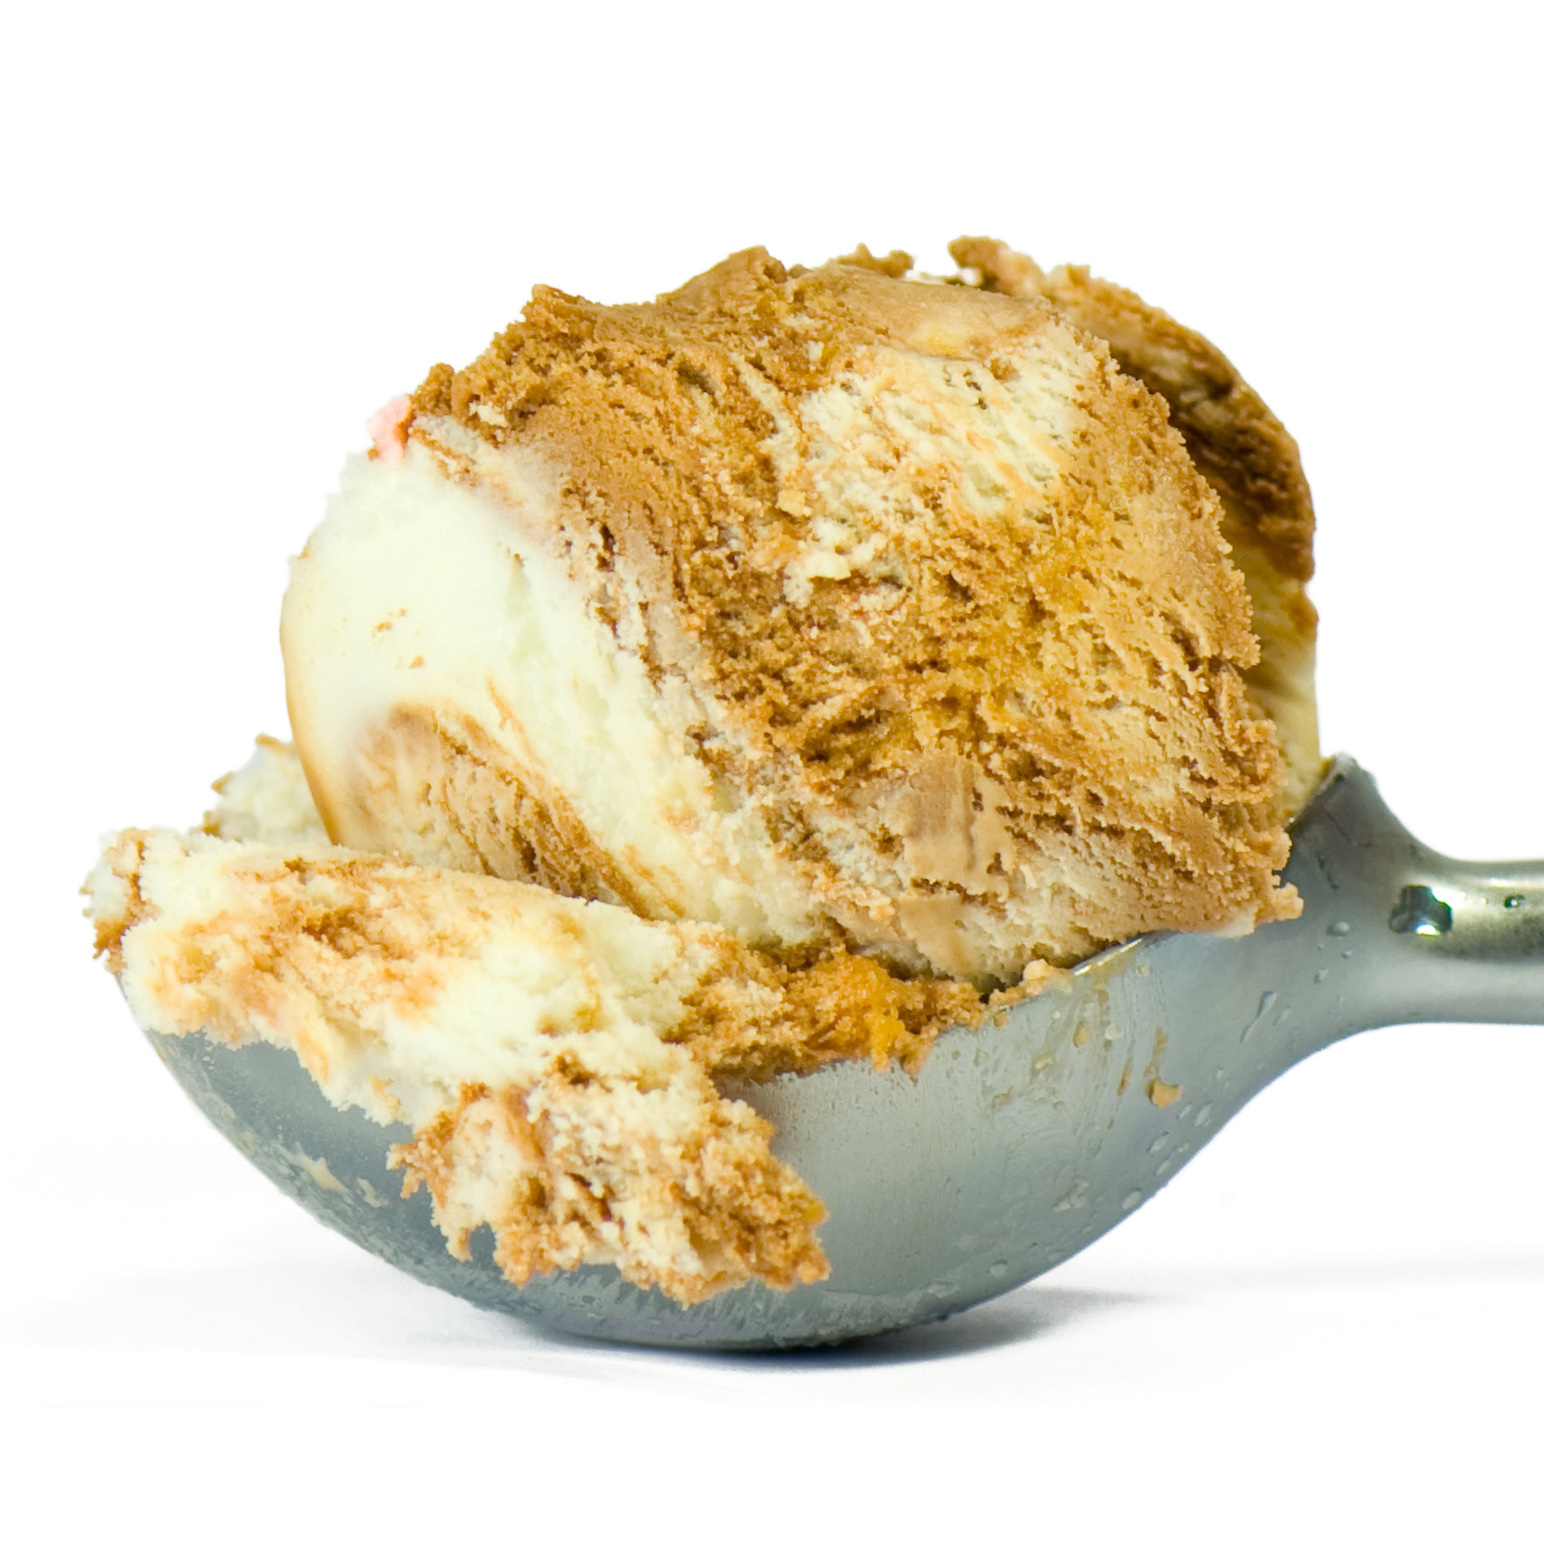 A steel ice cream scoop filled with chocolate and vanilla isolated on white